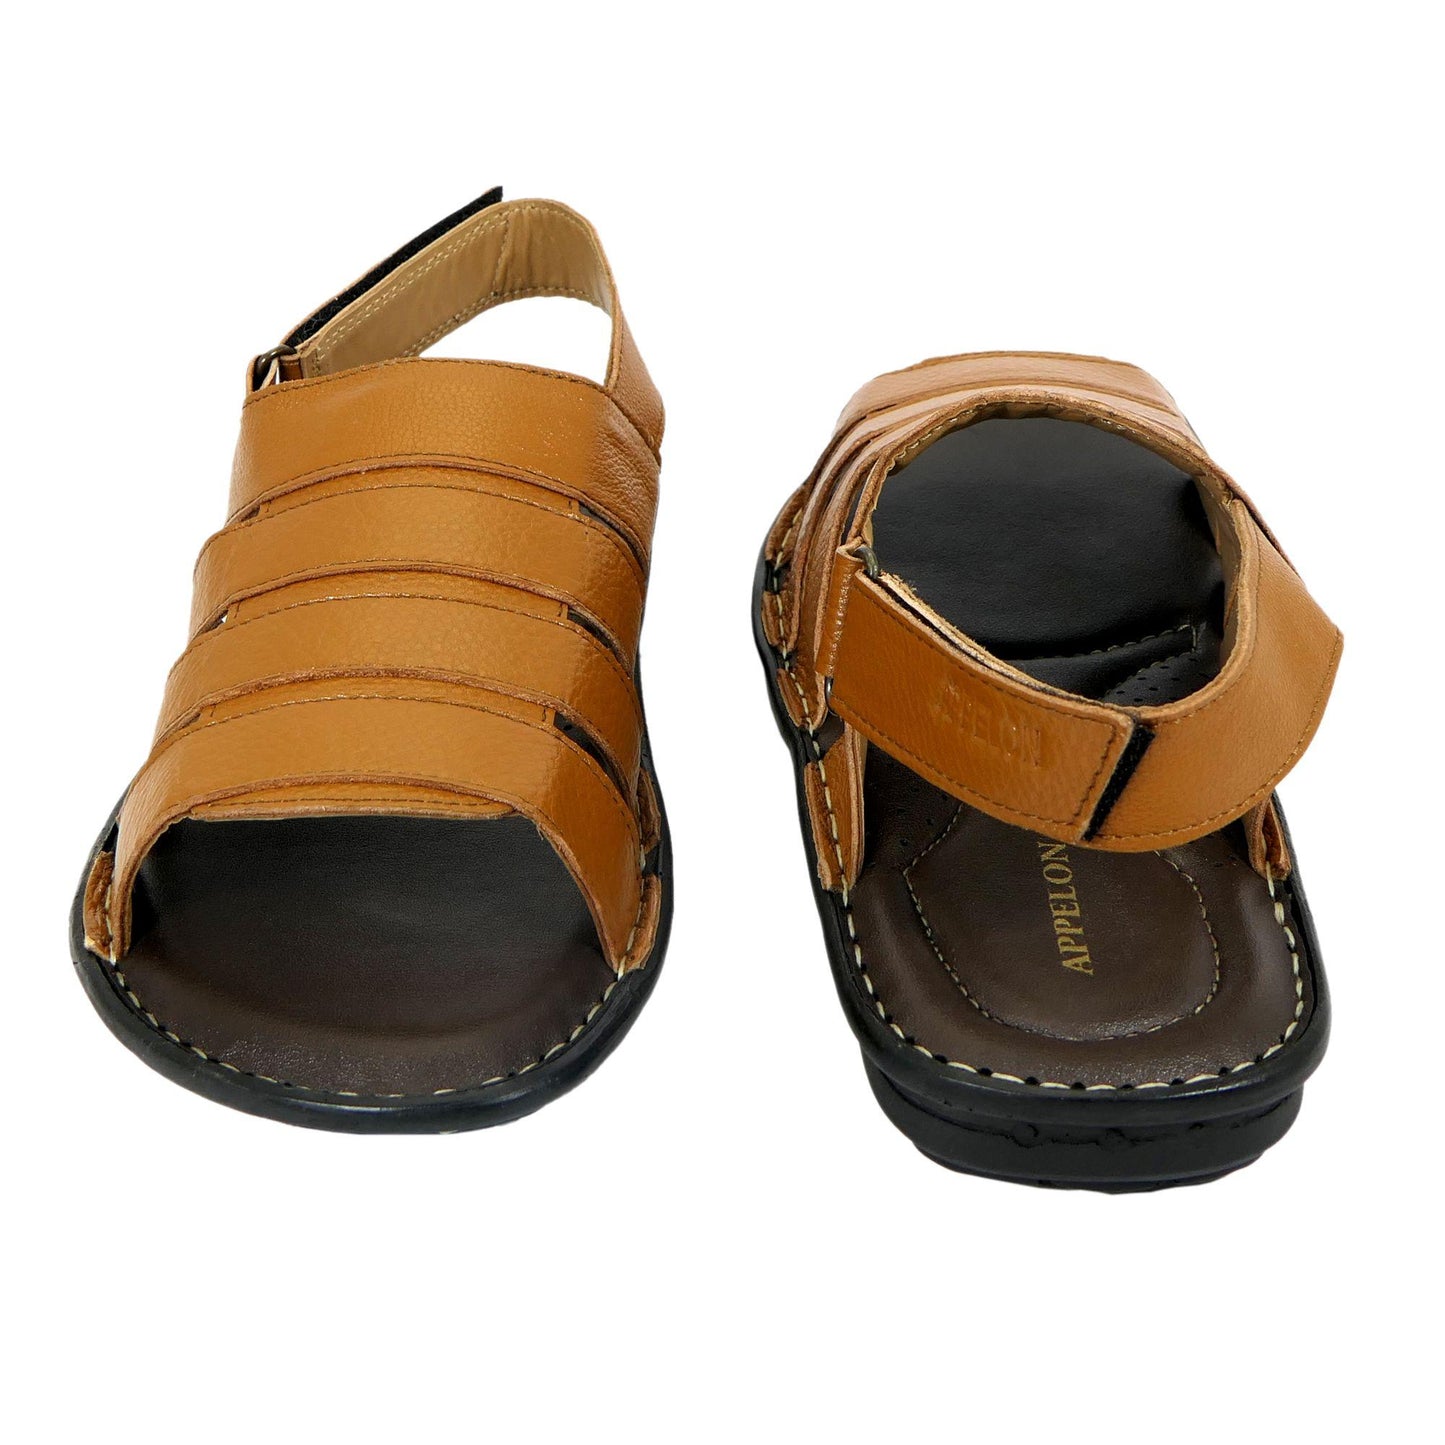 AM PM Men's Daily wear Leather Sandals - Blossom Mantra